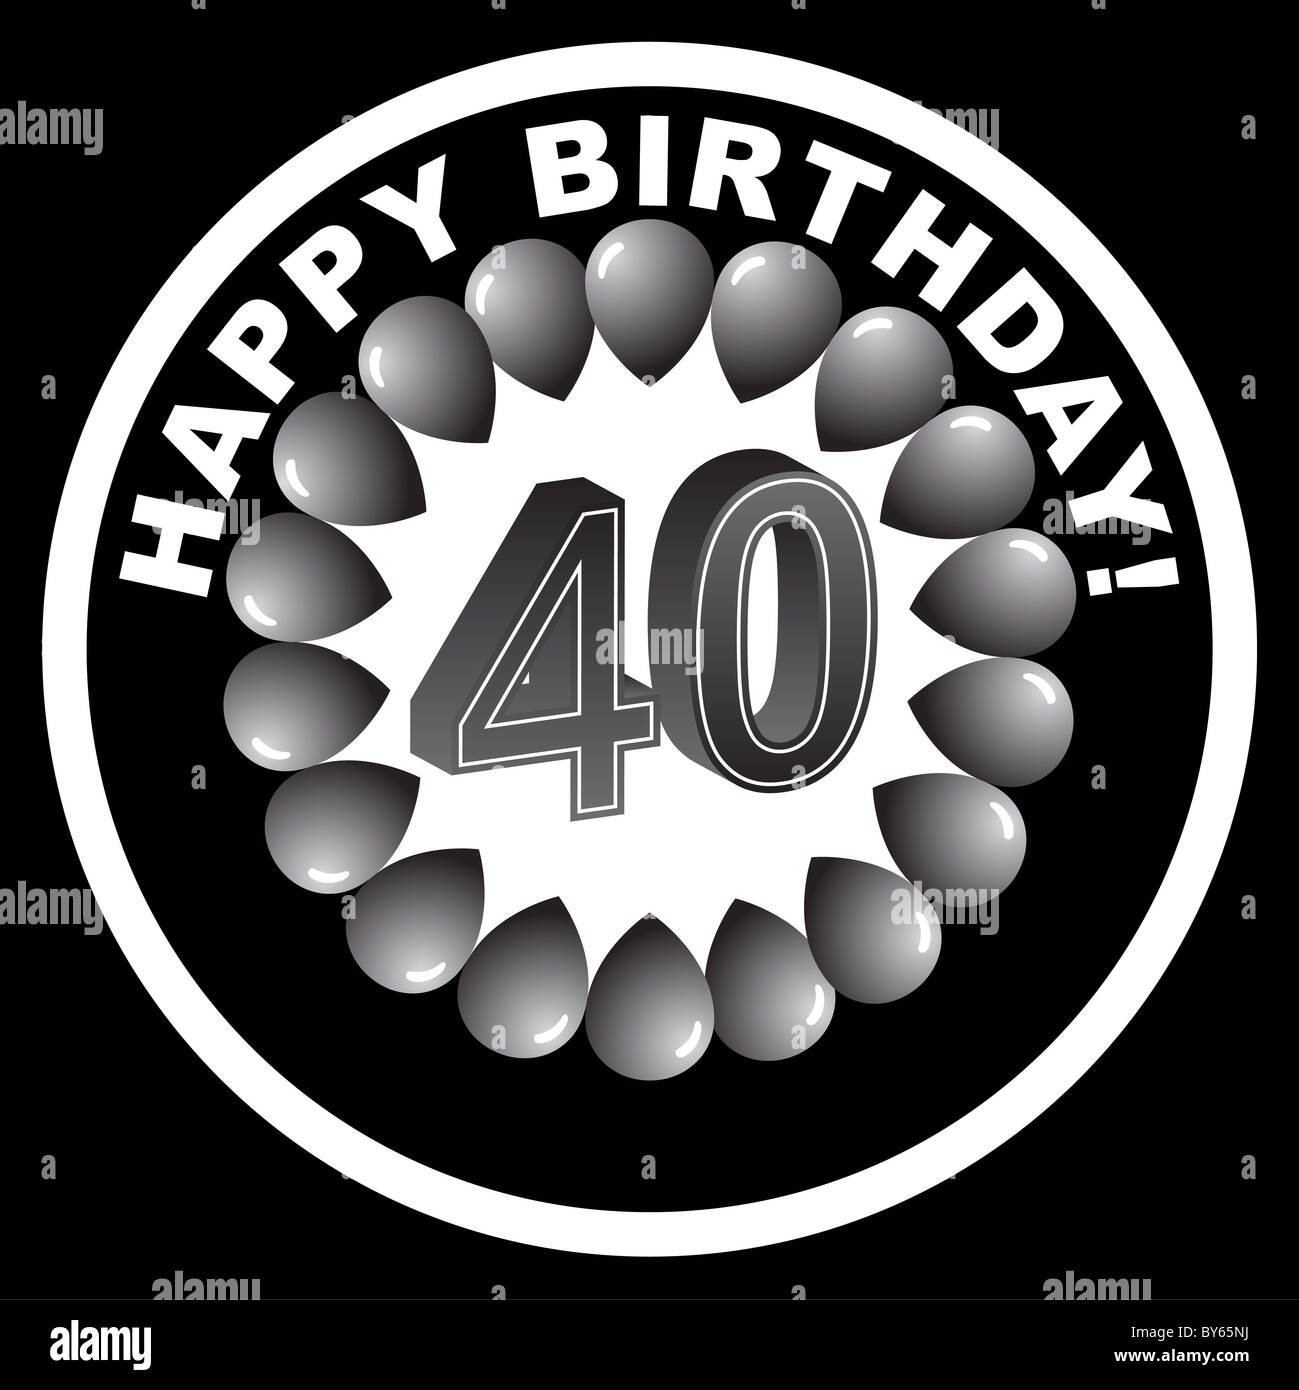 Over the Hill - Happy 40th Birthday. Stock Photo